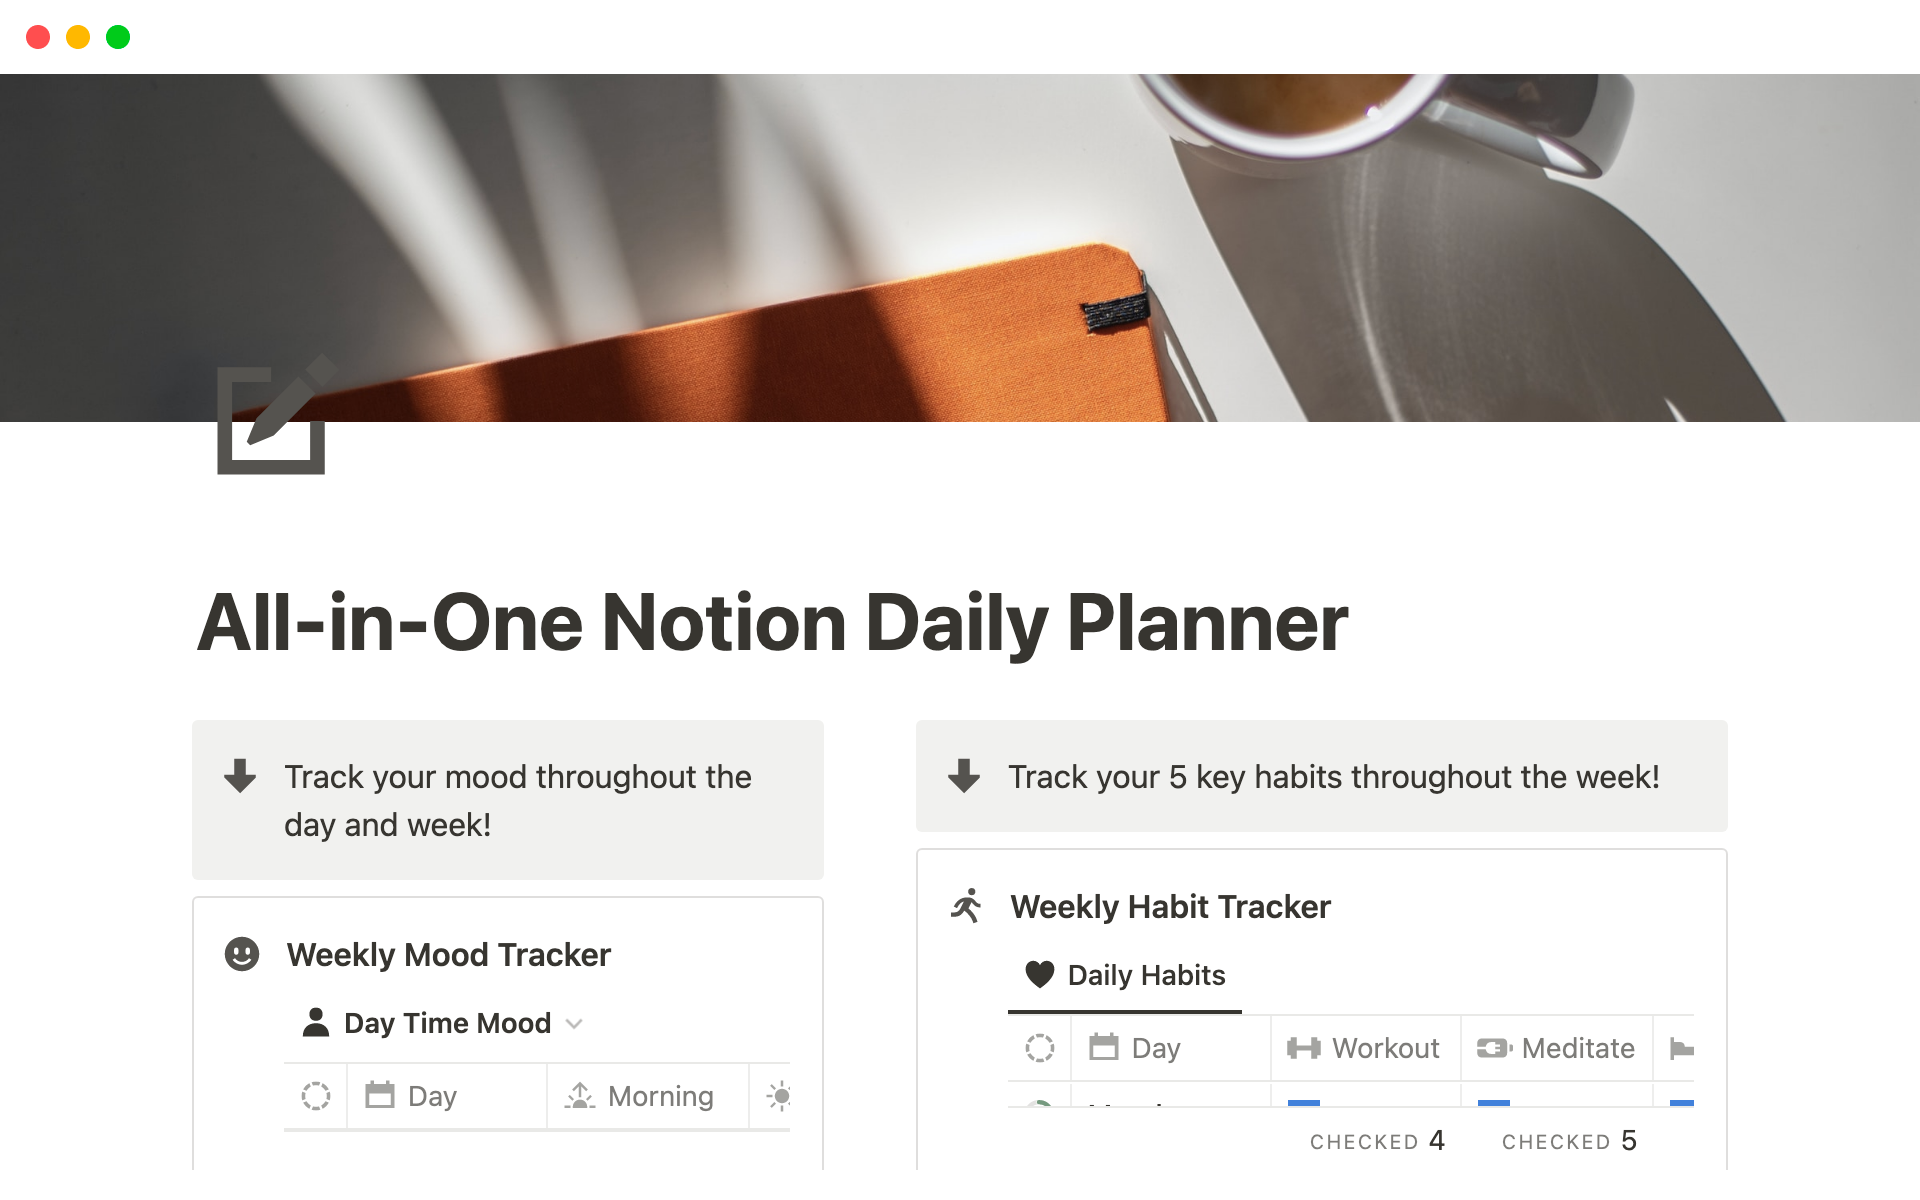 Reach peak personal growth with the All-in-One Notion Daily Planner, a comprehensive Notion planner that integrates tasks, goals, and habits for a holistic approach to your daily schedule.